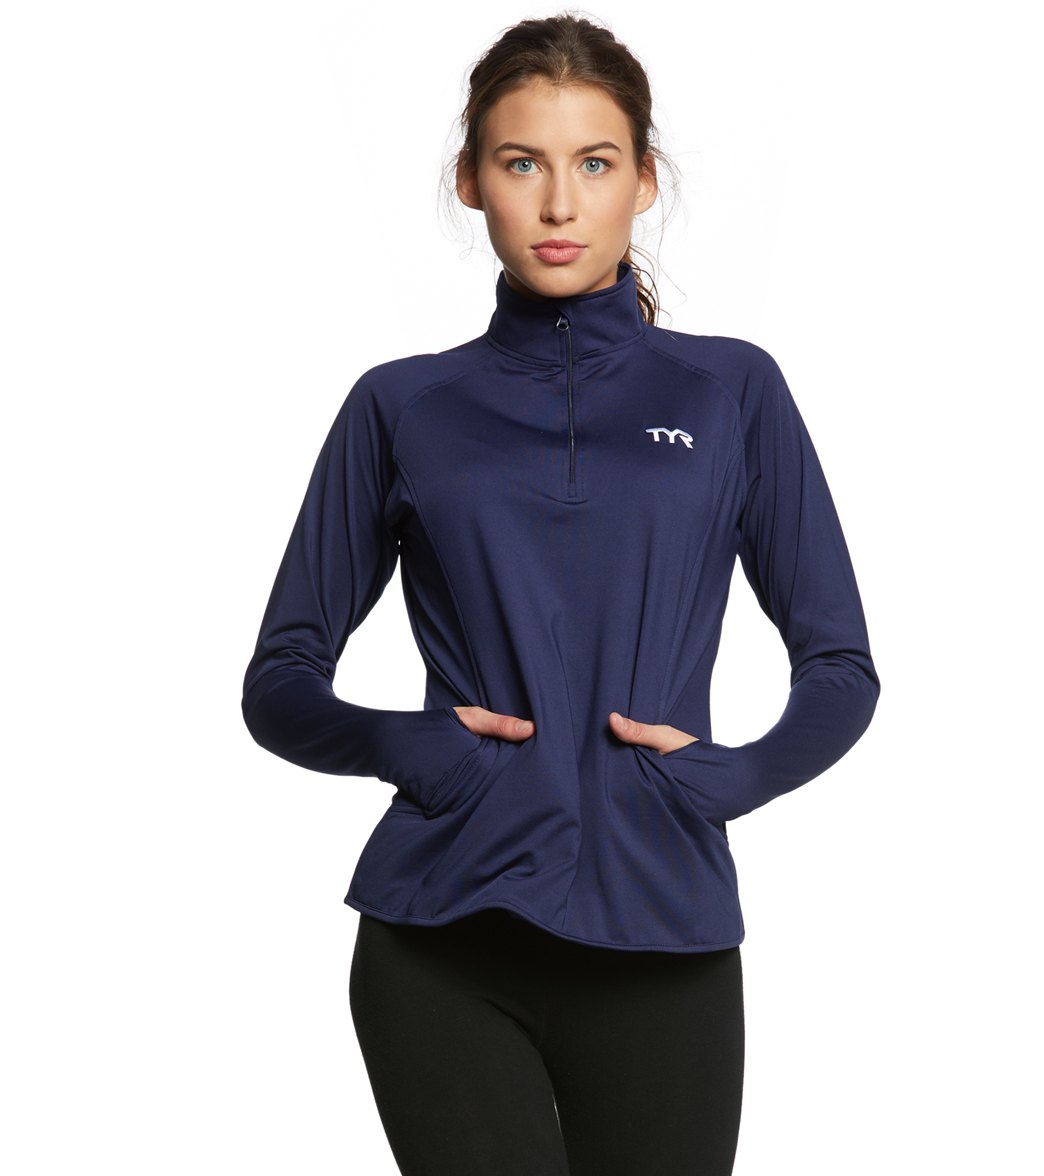 TYR Women's Alliance 1/4 Zip Pullover Warm Up Jacket at SwimOutlet.com ...